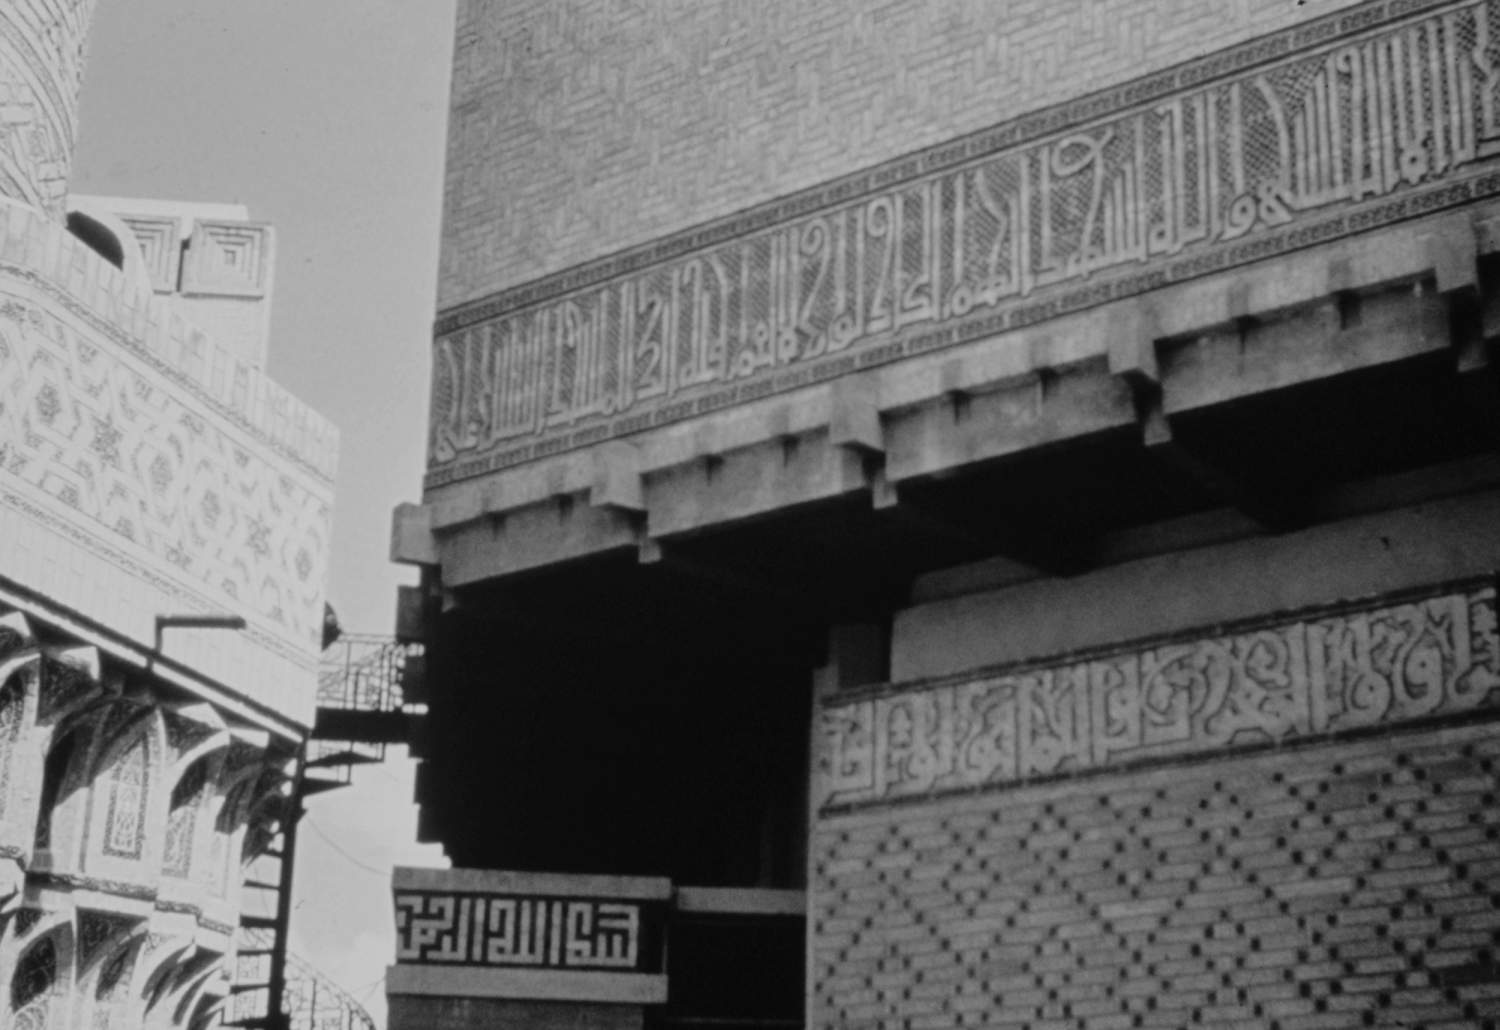 Detail view showing brickwork, geometric patterns, and Kufic inscriptions on the exterior of the prayer hall, and partial view of the base of the restored minaret.